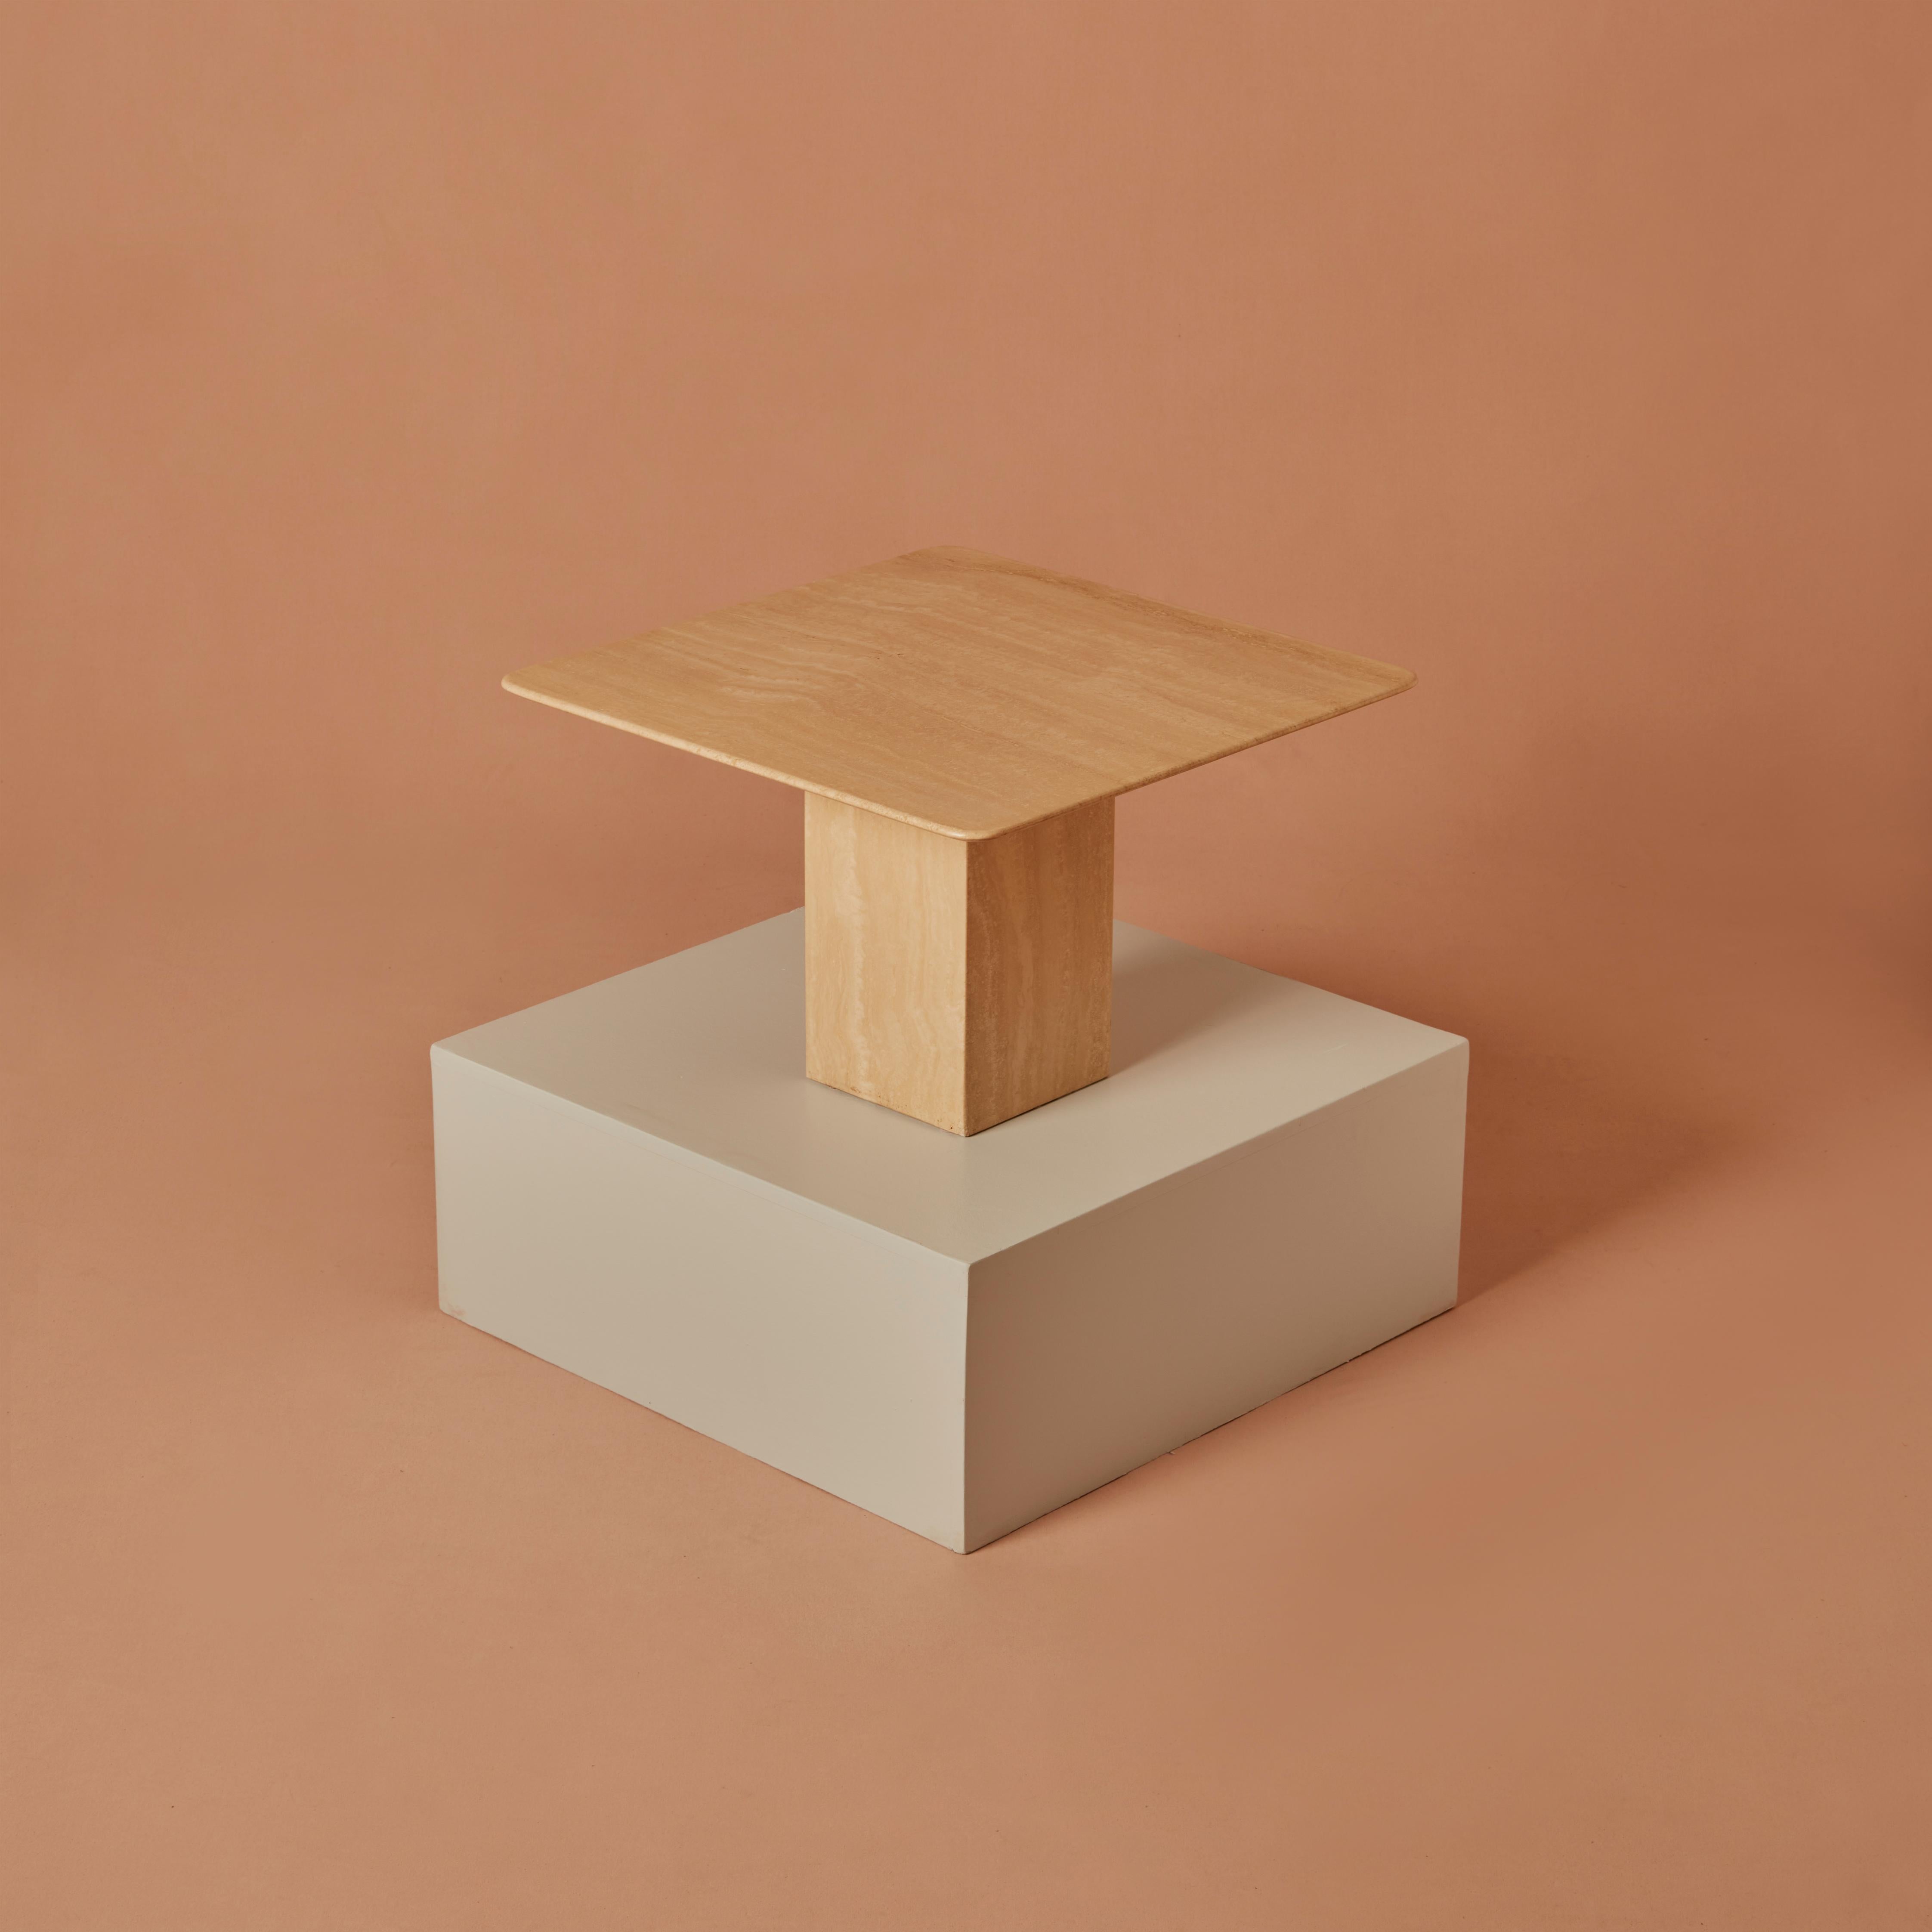 Side table / coffee table, travertine, 1970s, Italy. Travertine side table with a square top with rounded corners and a block-shaped base, H.45cm, W.70cm, D.70cm.